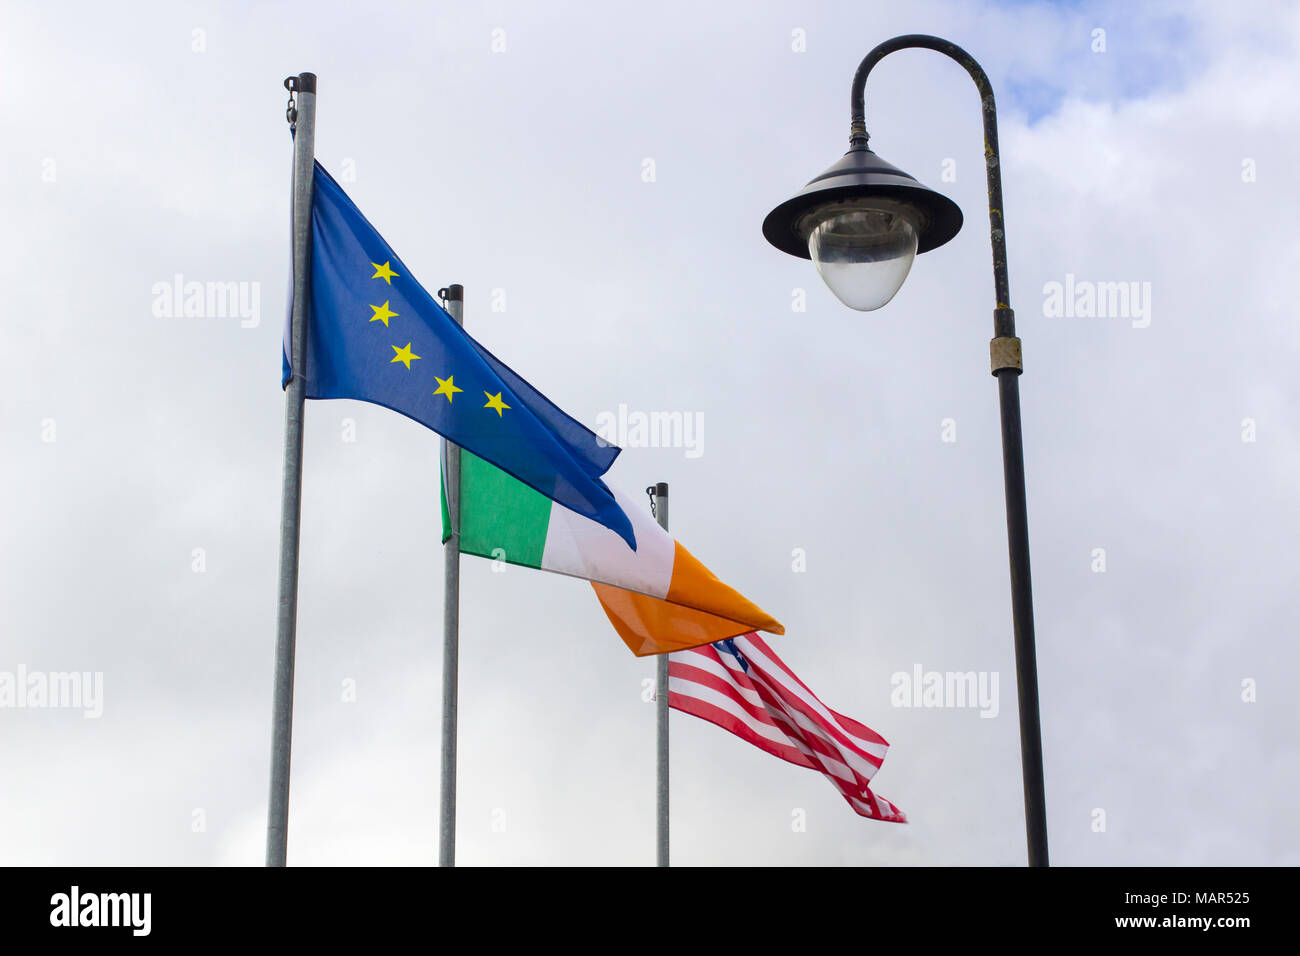 The Irish, American and European Union flags flying together in the Irish town of Blarney in County Cork Stock Photo